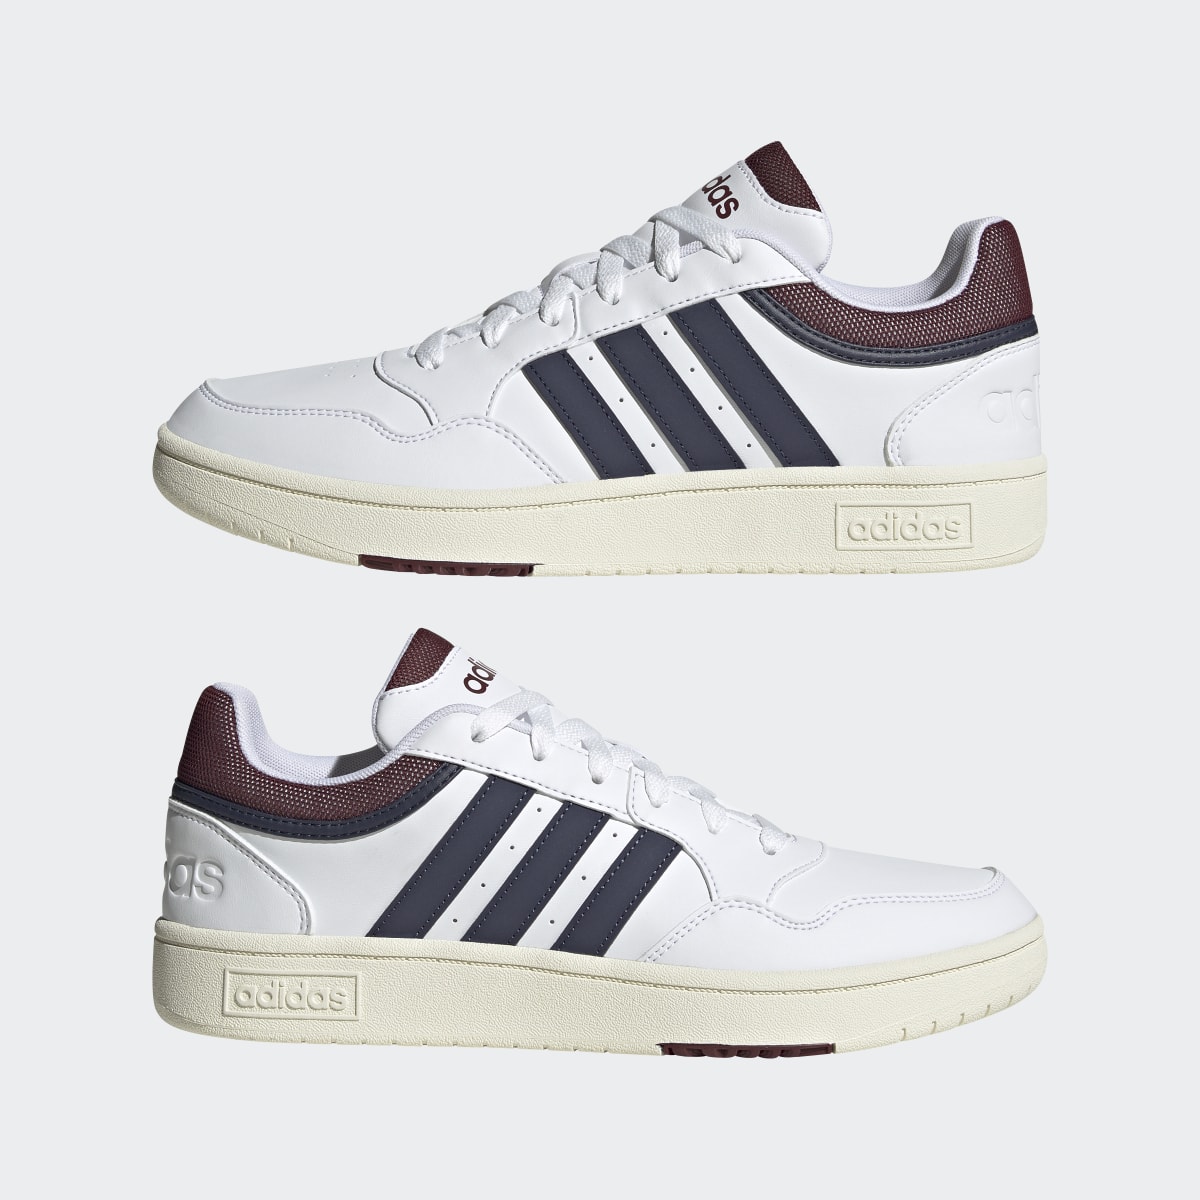 Adidas Hoops 3.0 Low Classic Vintage Schuh. 8